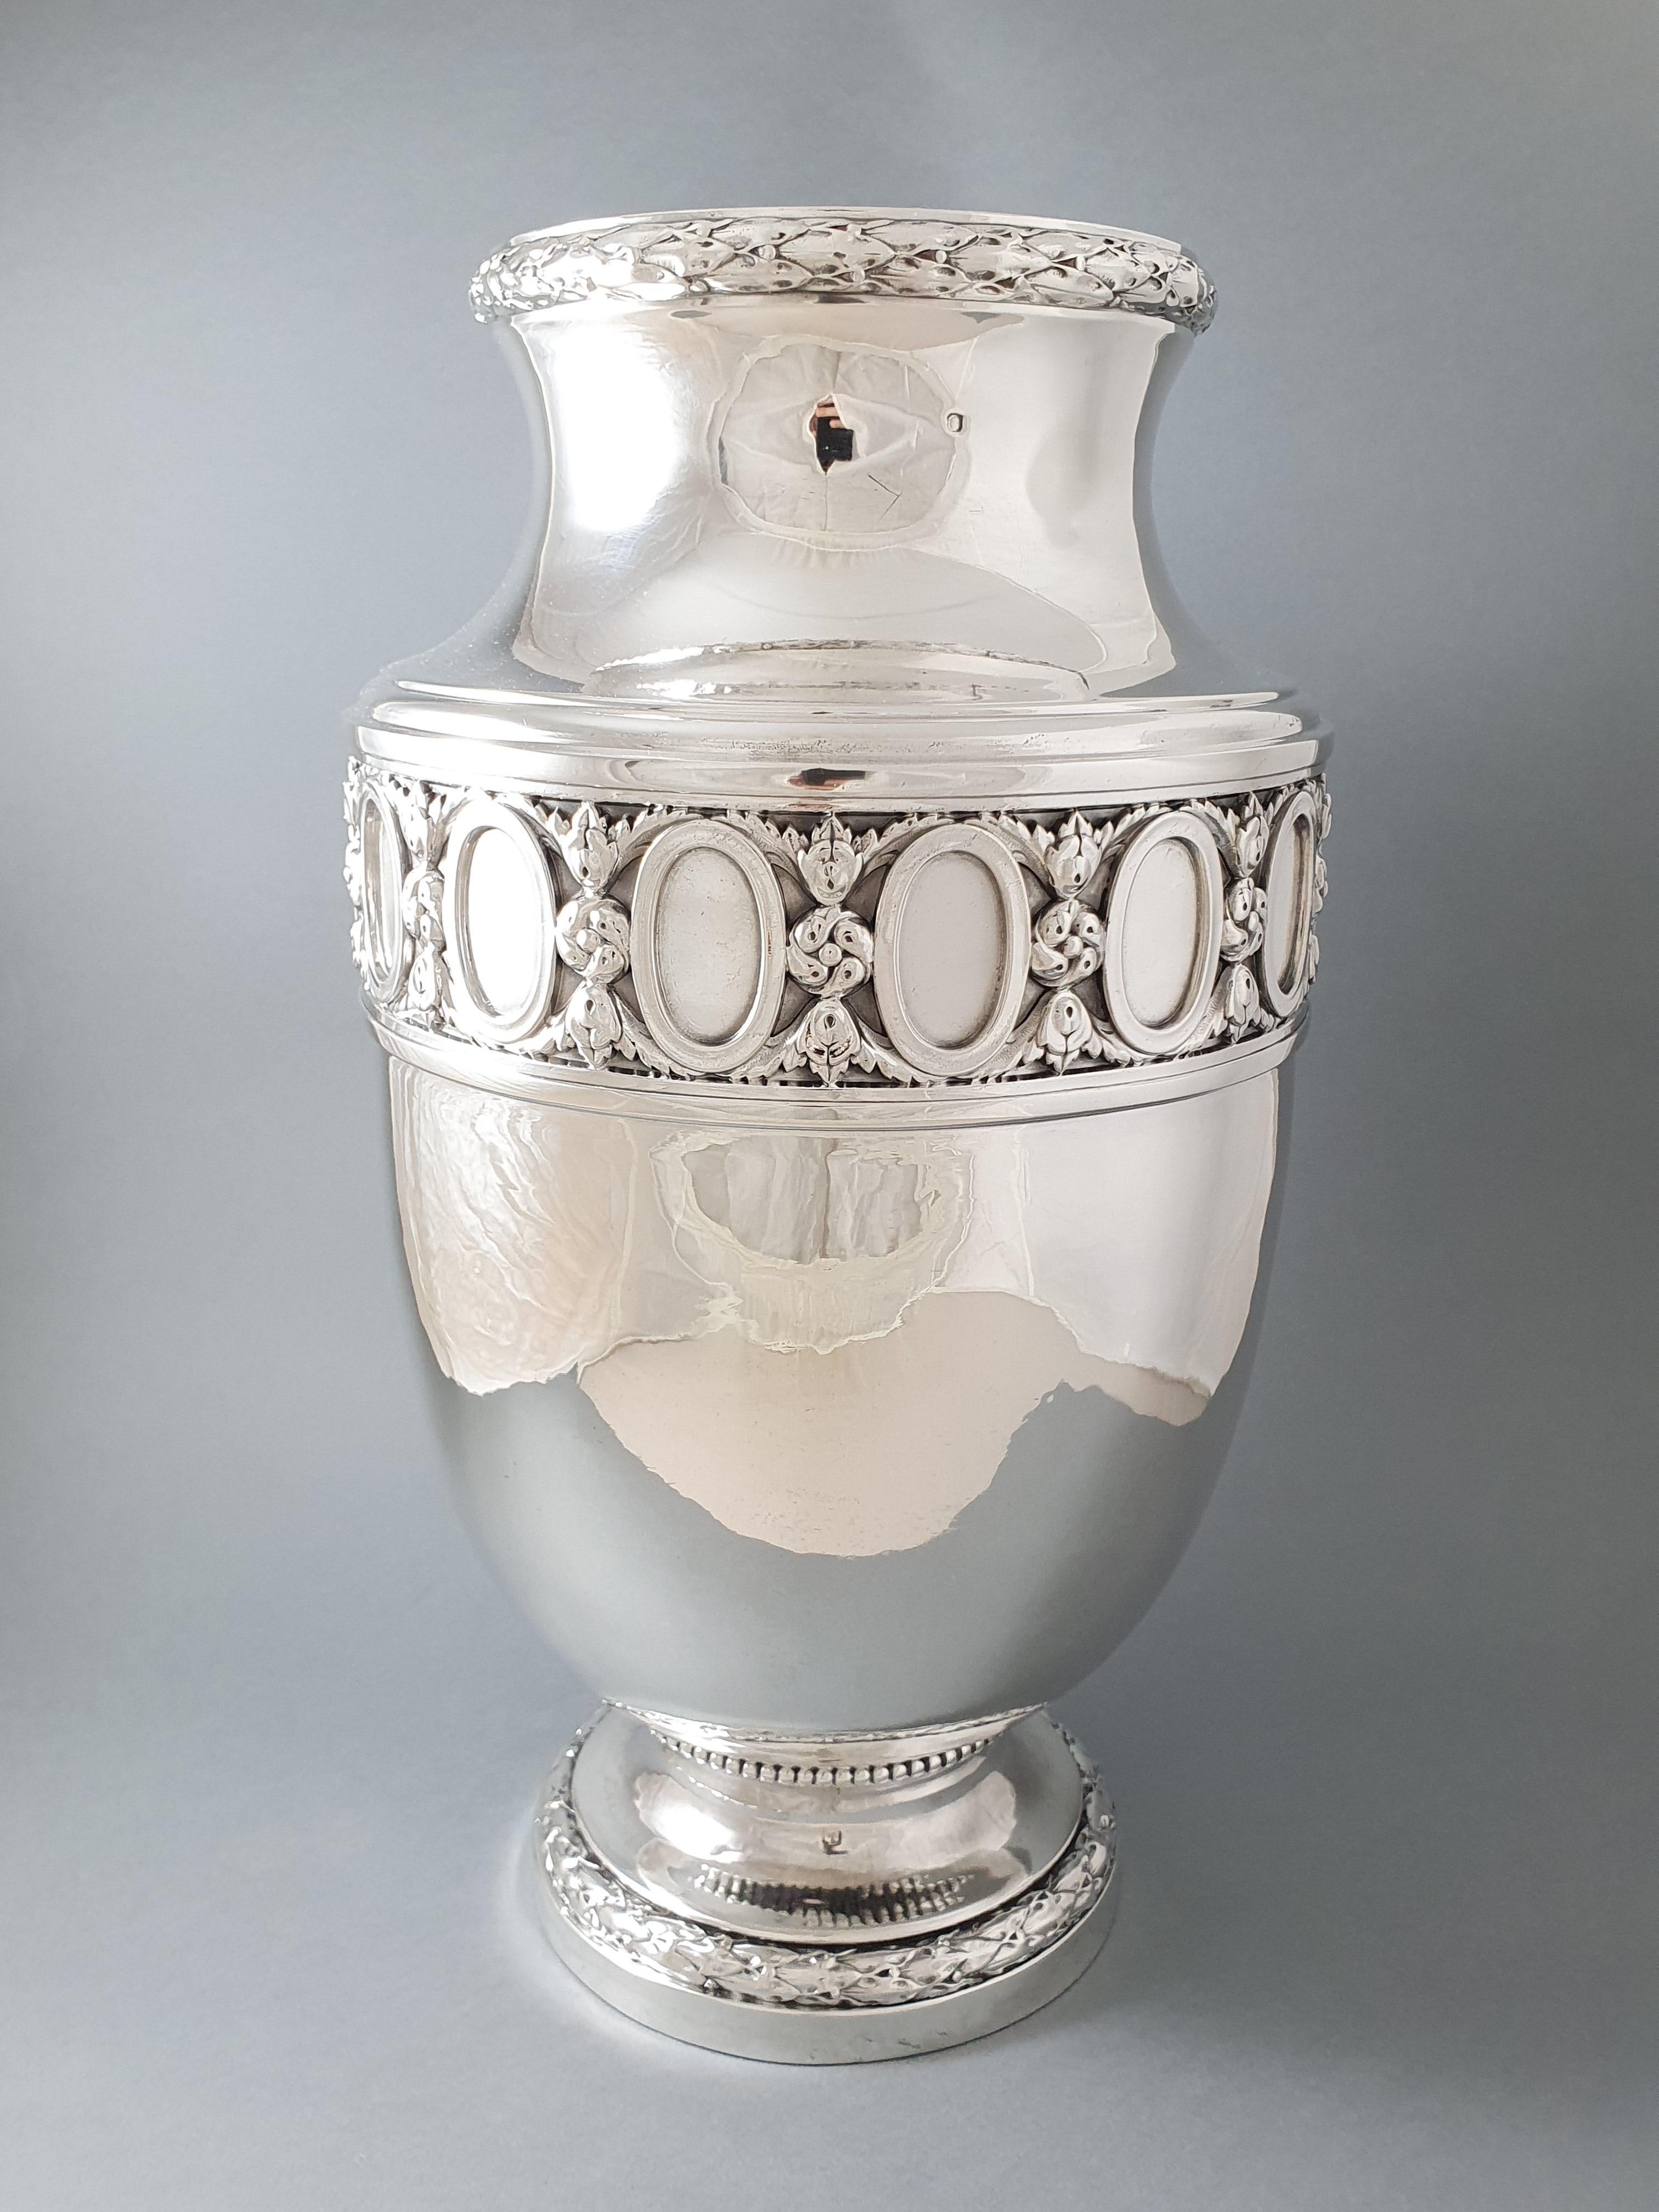 Large Sterling silver vase from the beginning of the 20th century
The foot and the neck decorated with a frieze of leaves, the body decorated with medallions, leaves and flowers

Hallmarked with Minerva 1st title for purity silver 
French work